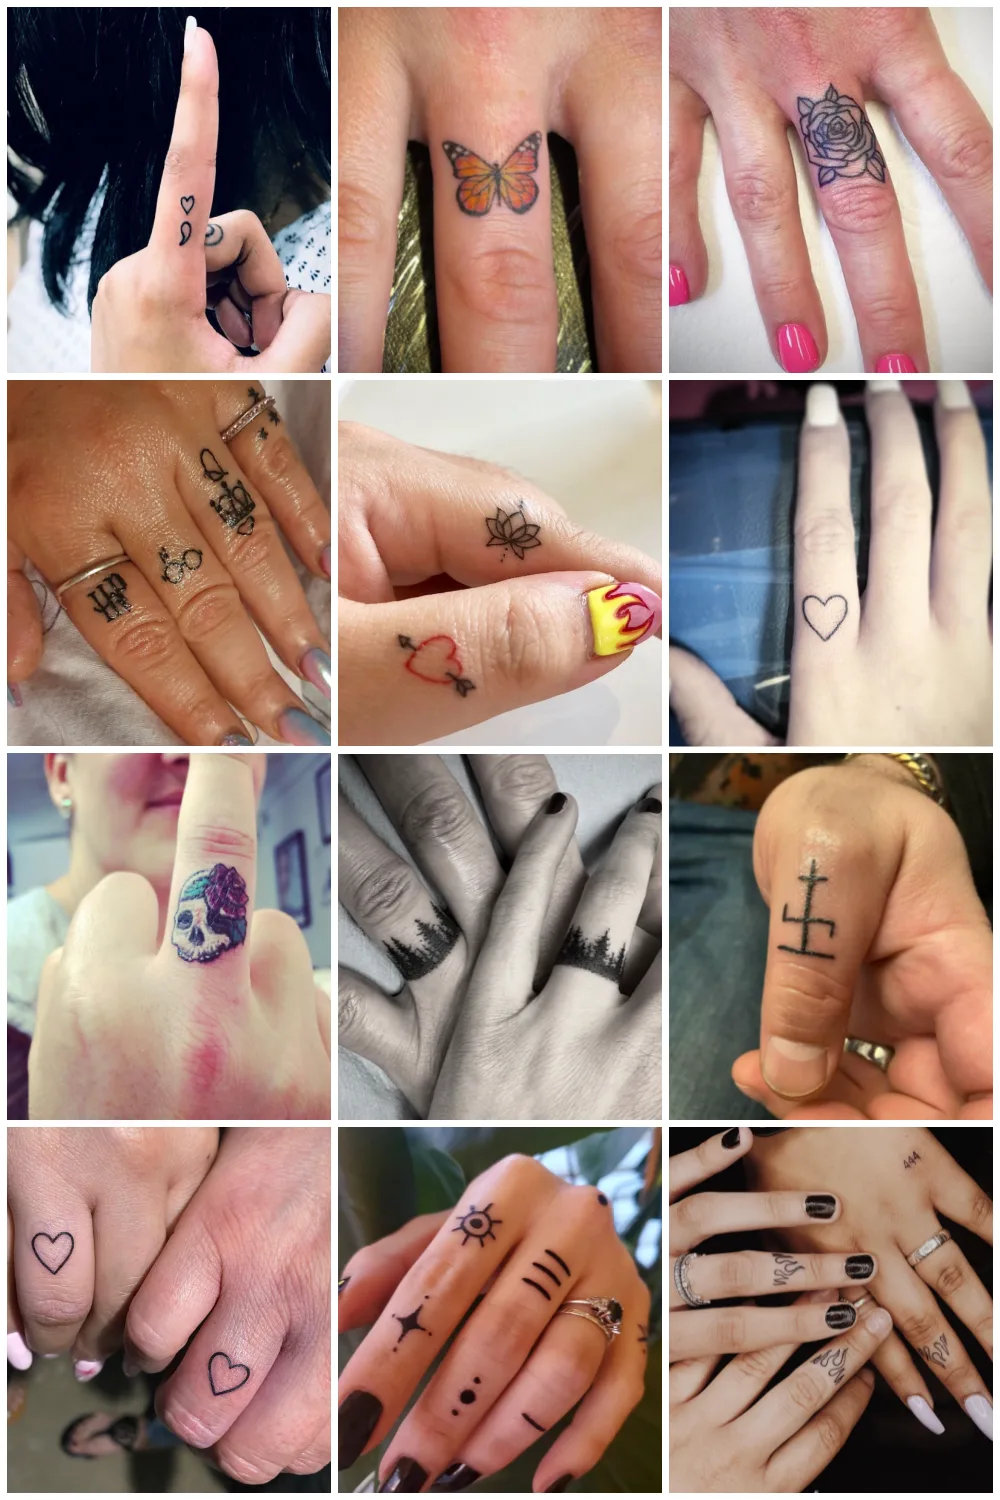 50 Eye-Catching Finger Tattoos That Women Just Can't Say No To - TattooBlend-cheohanoi.vn